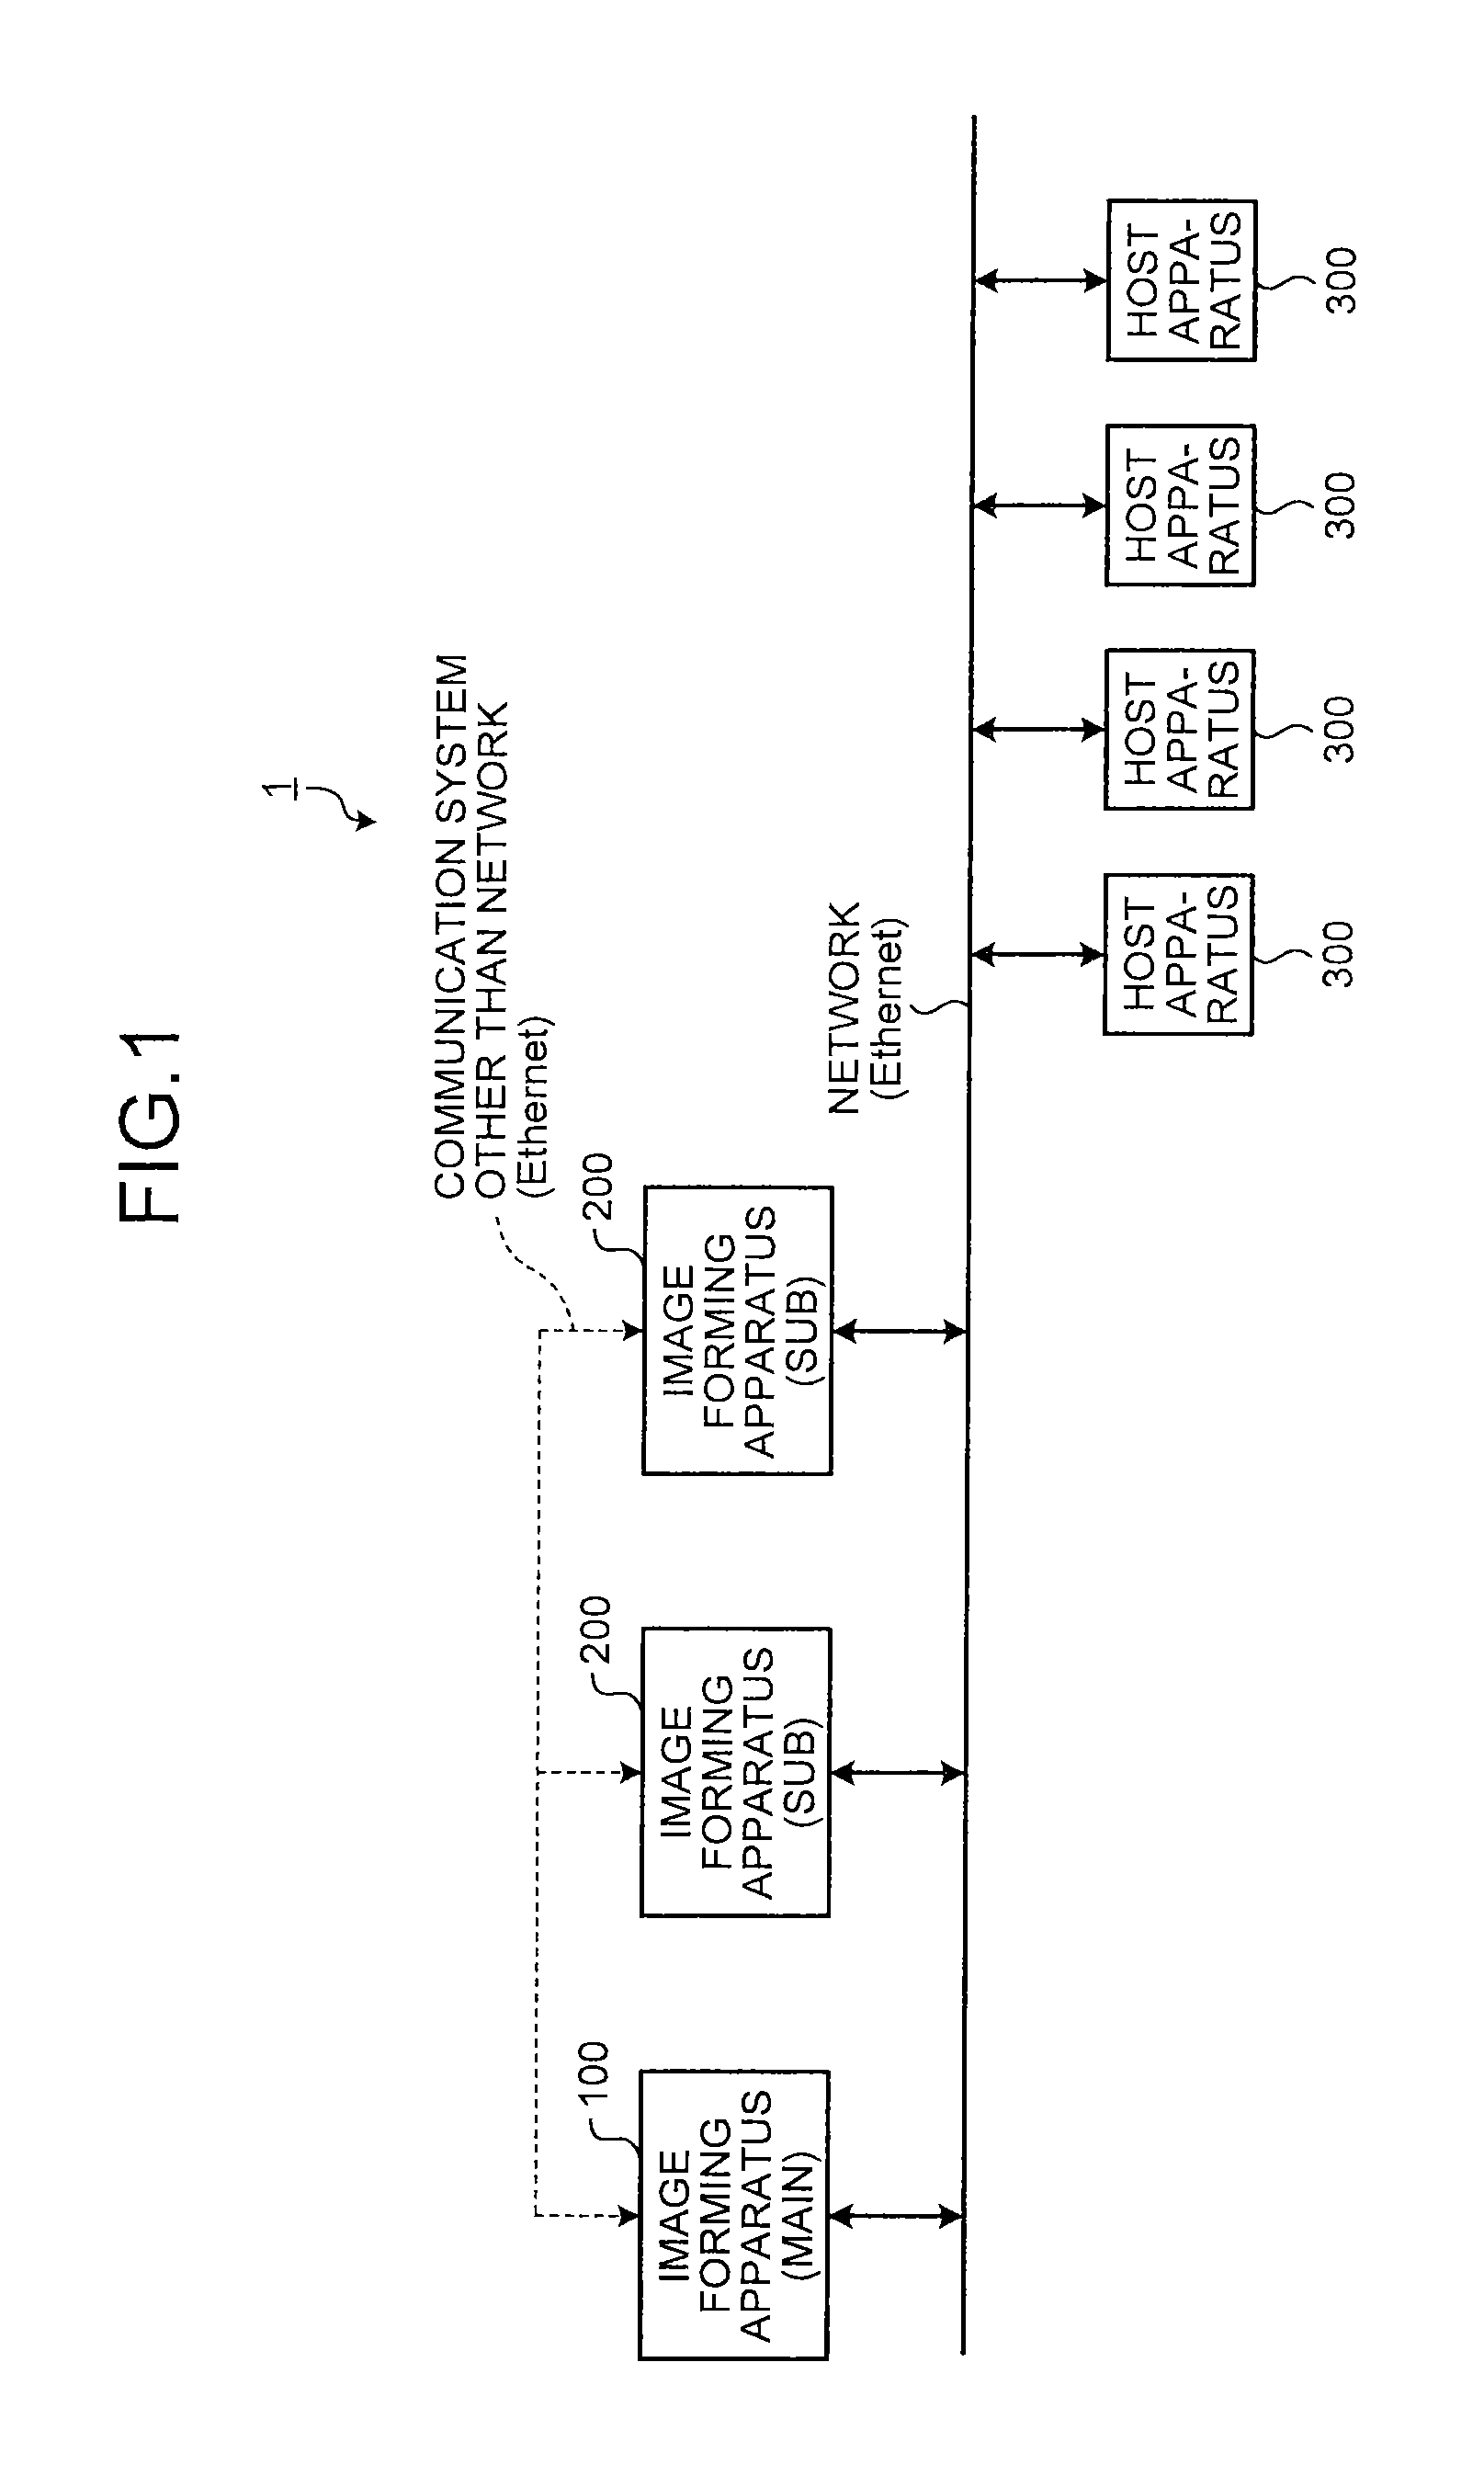 Image forming system including a first image forming apparatus for controlling a second image forming apparatus to shift into a sleep mode